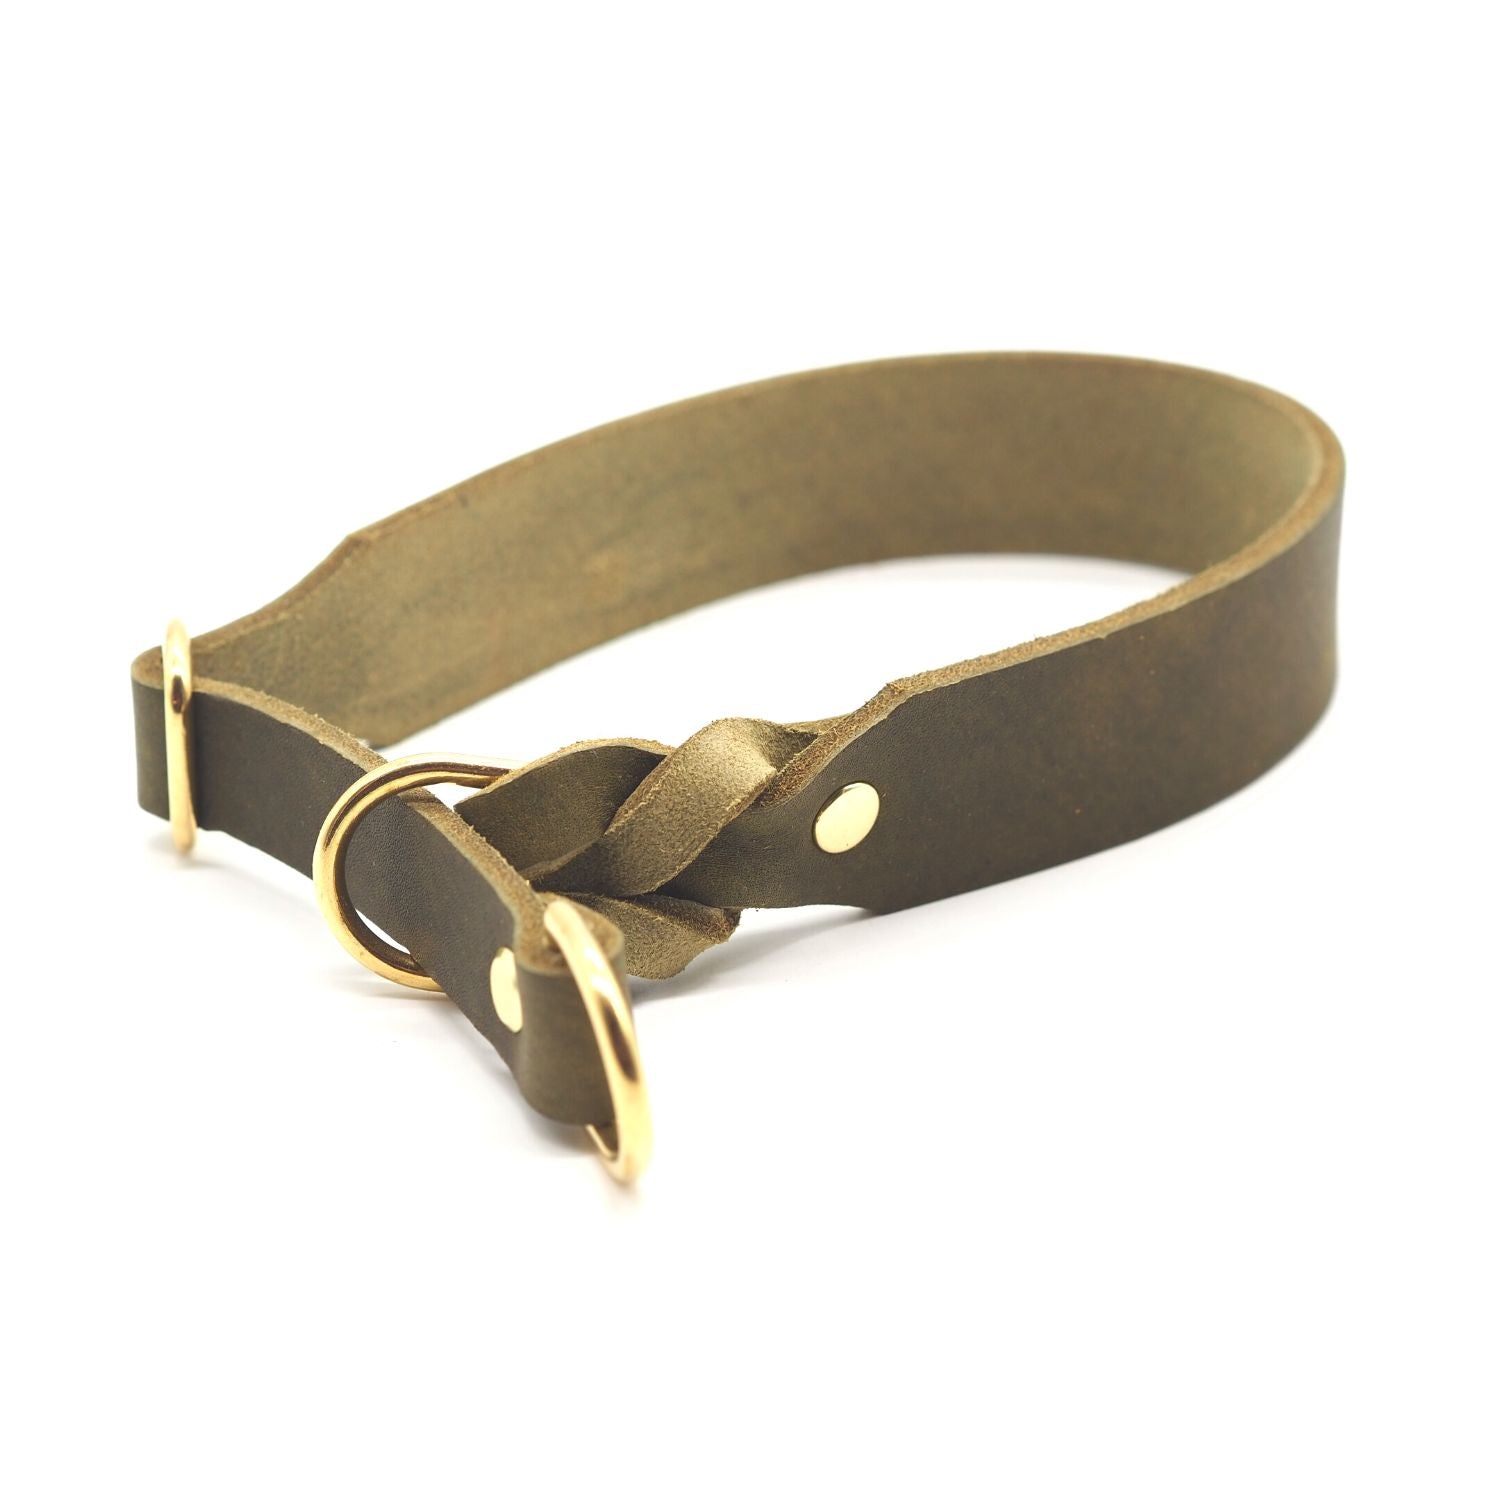 Pull stop collar made of greased leather 'Olive'